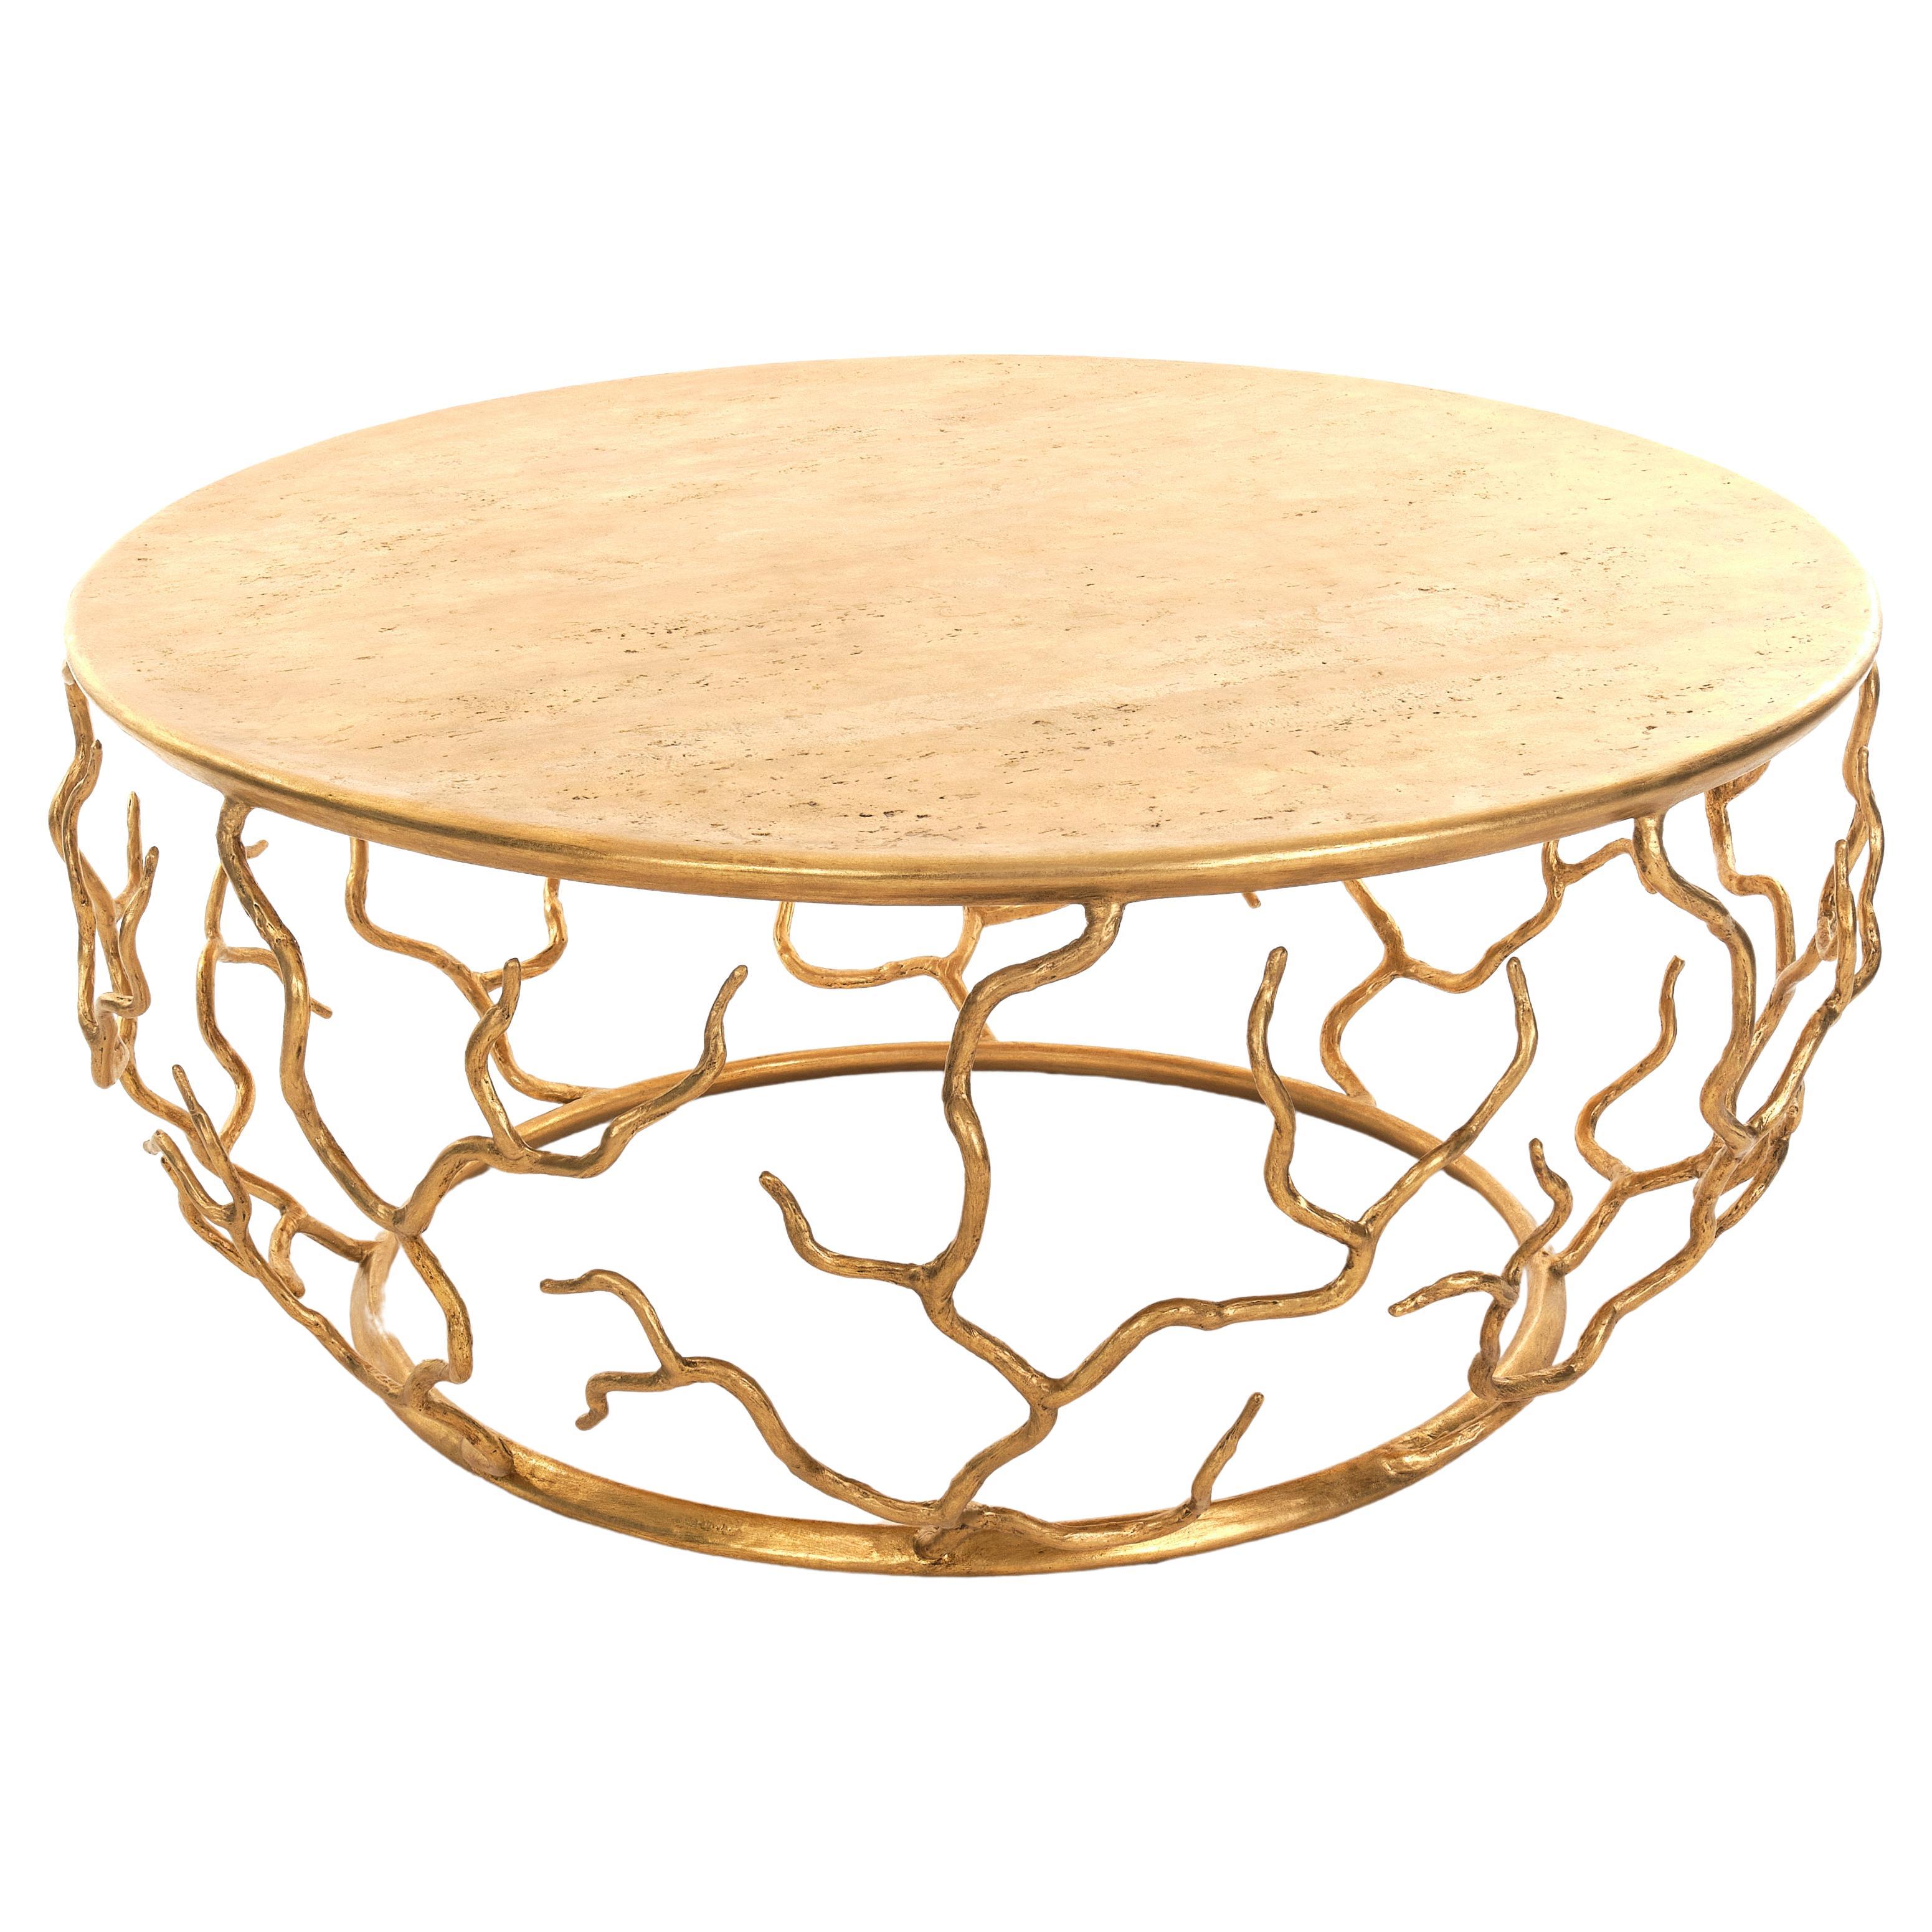 Organic Coffee Table “Etna” in Antique Gold, Benediko For Sale